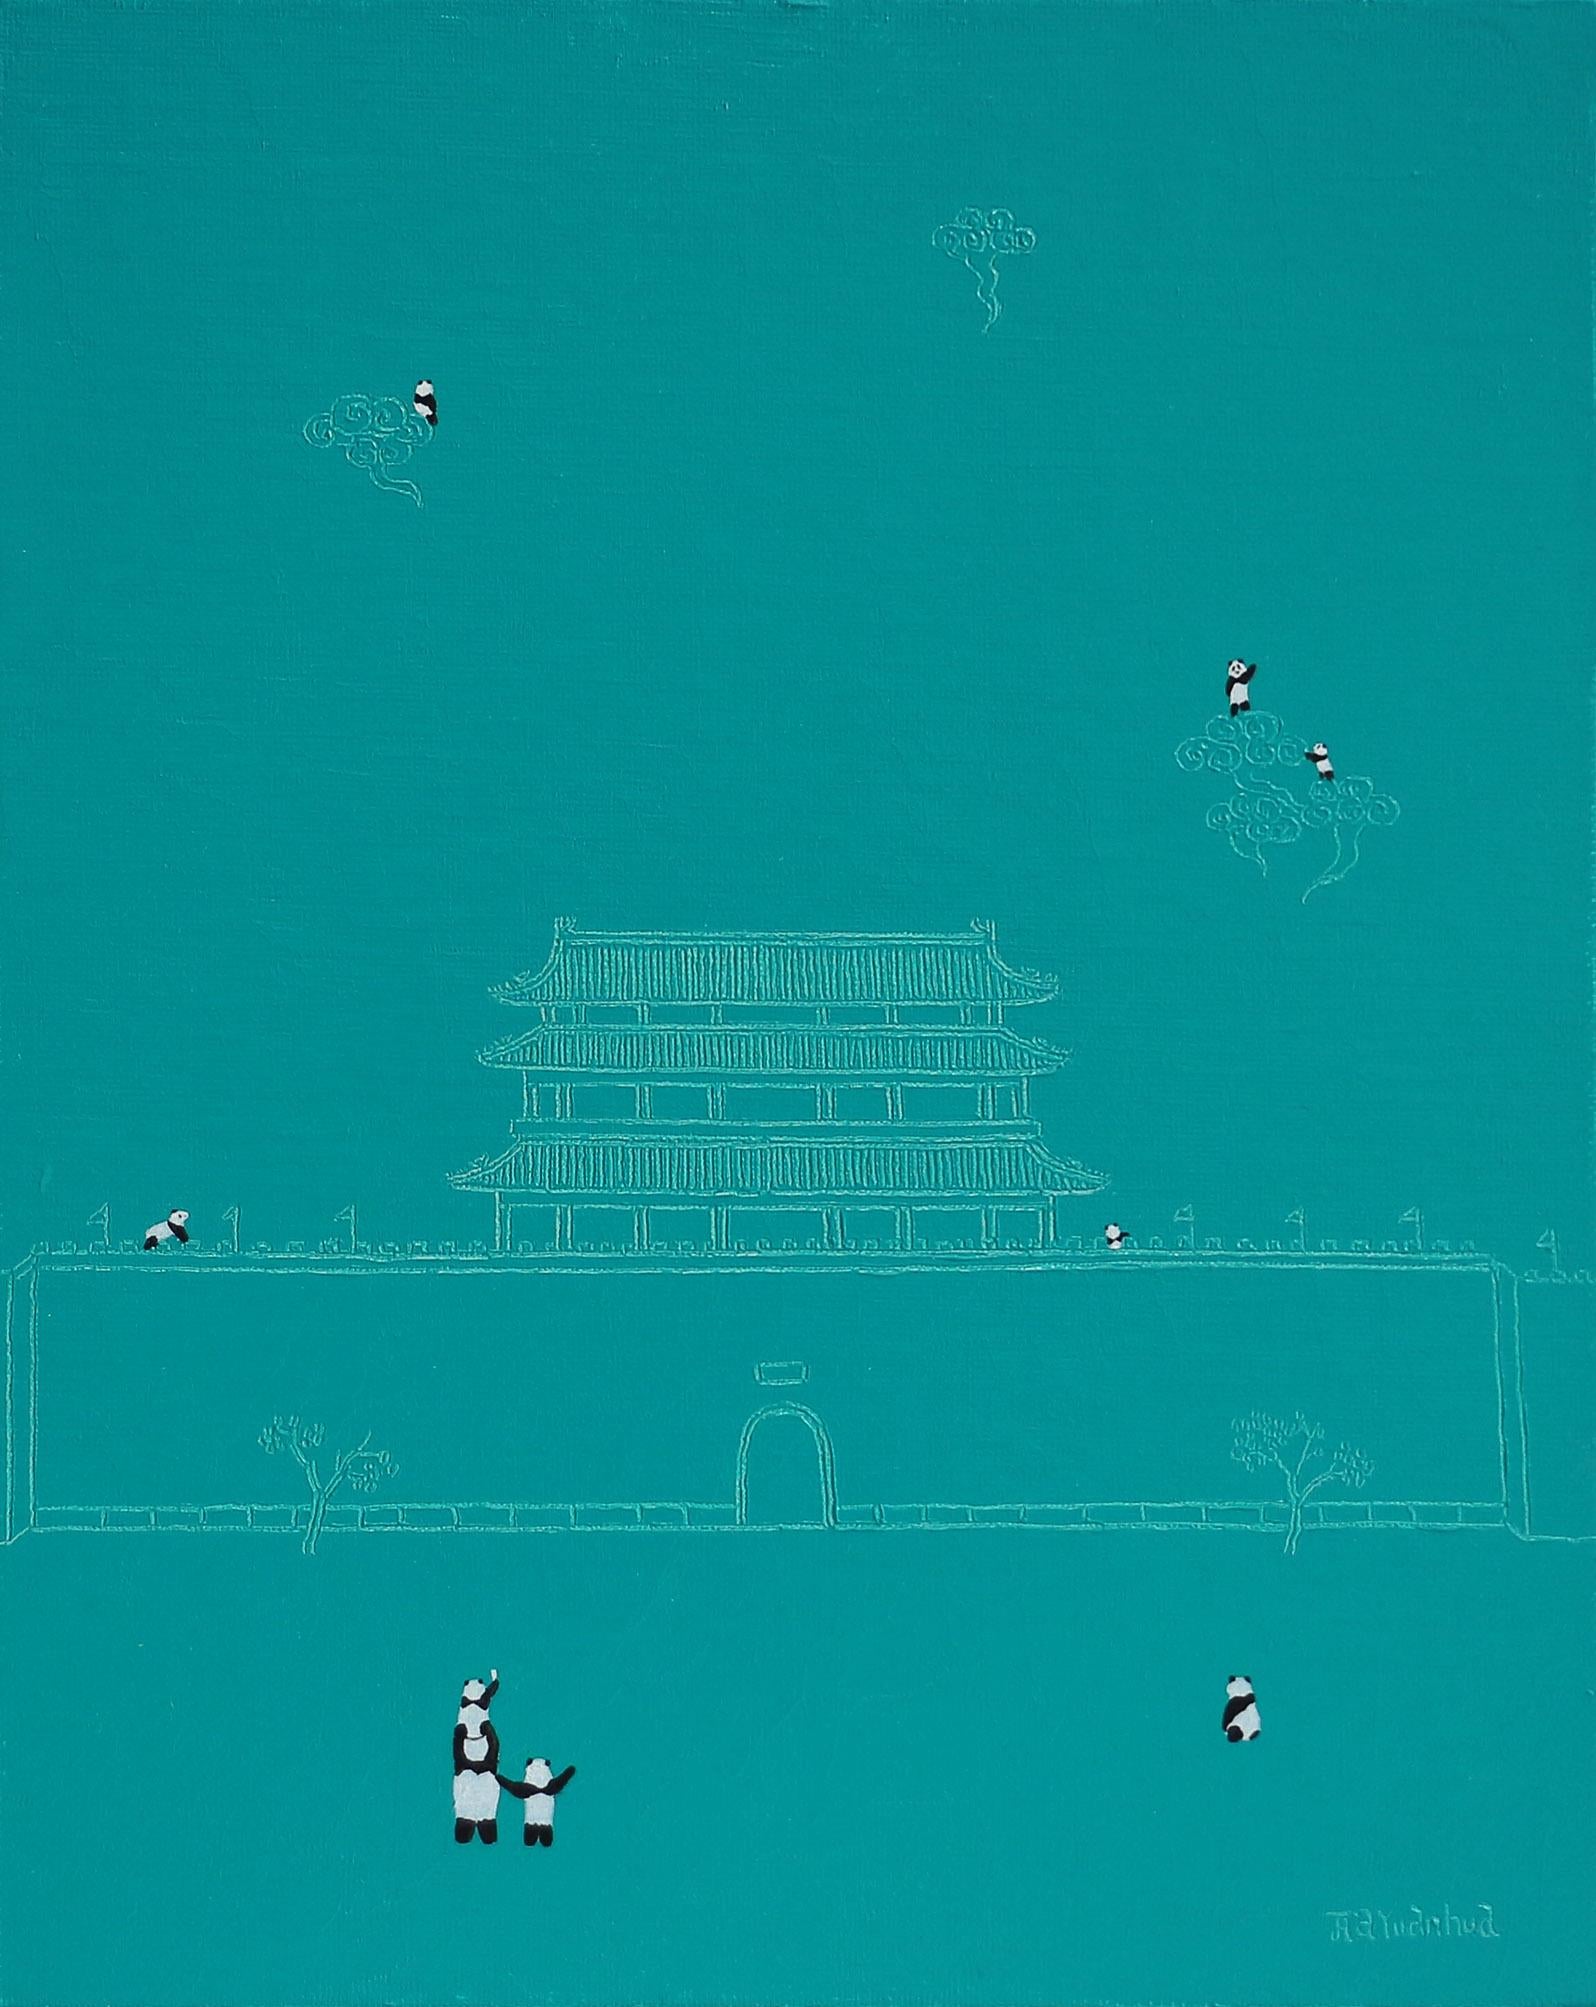 Chinese Contemporary Art by Jia Yuan-Hua - On the Cloud No.2